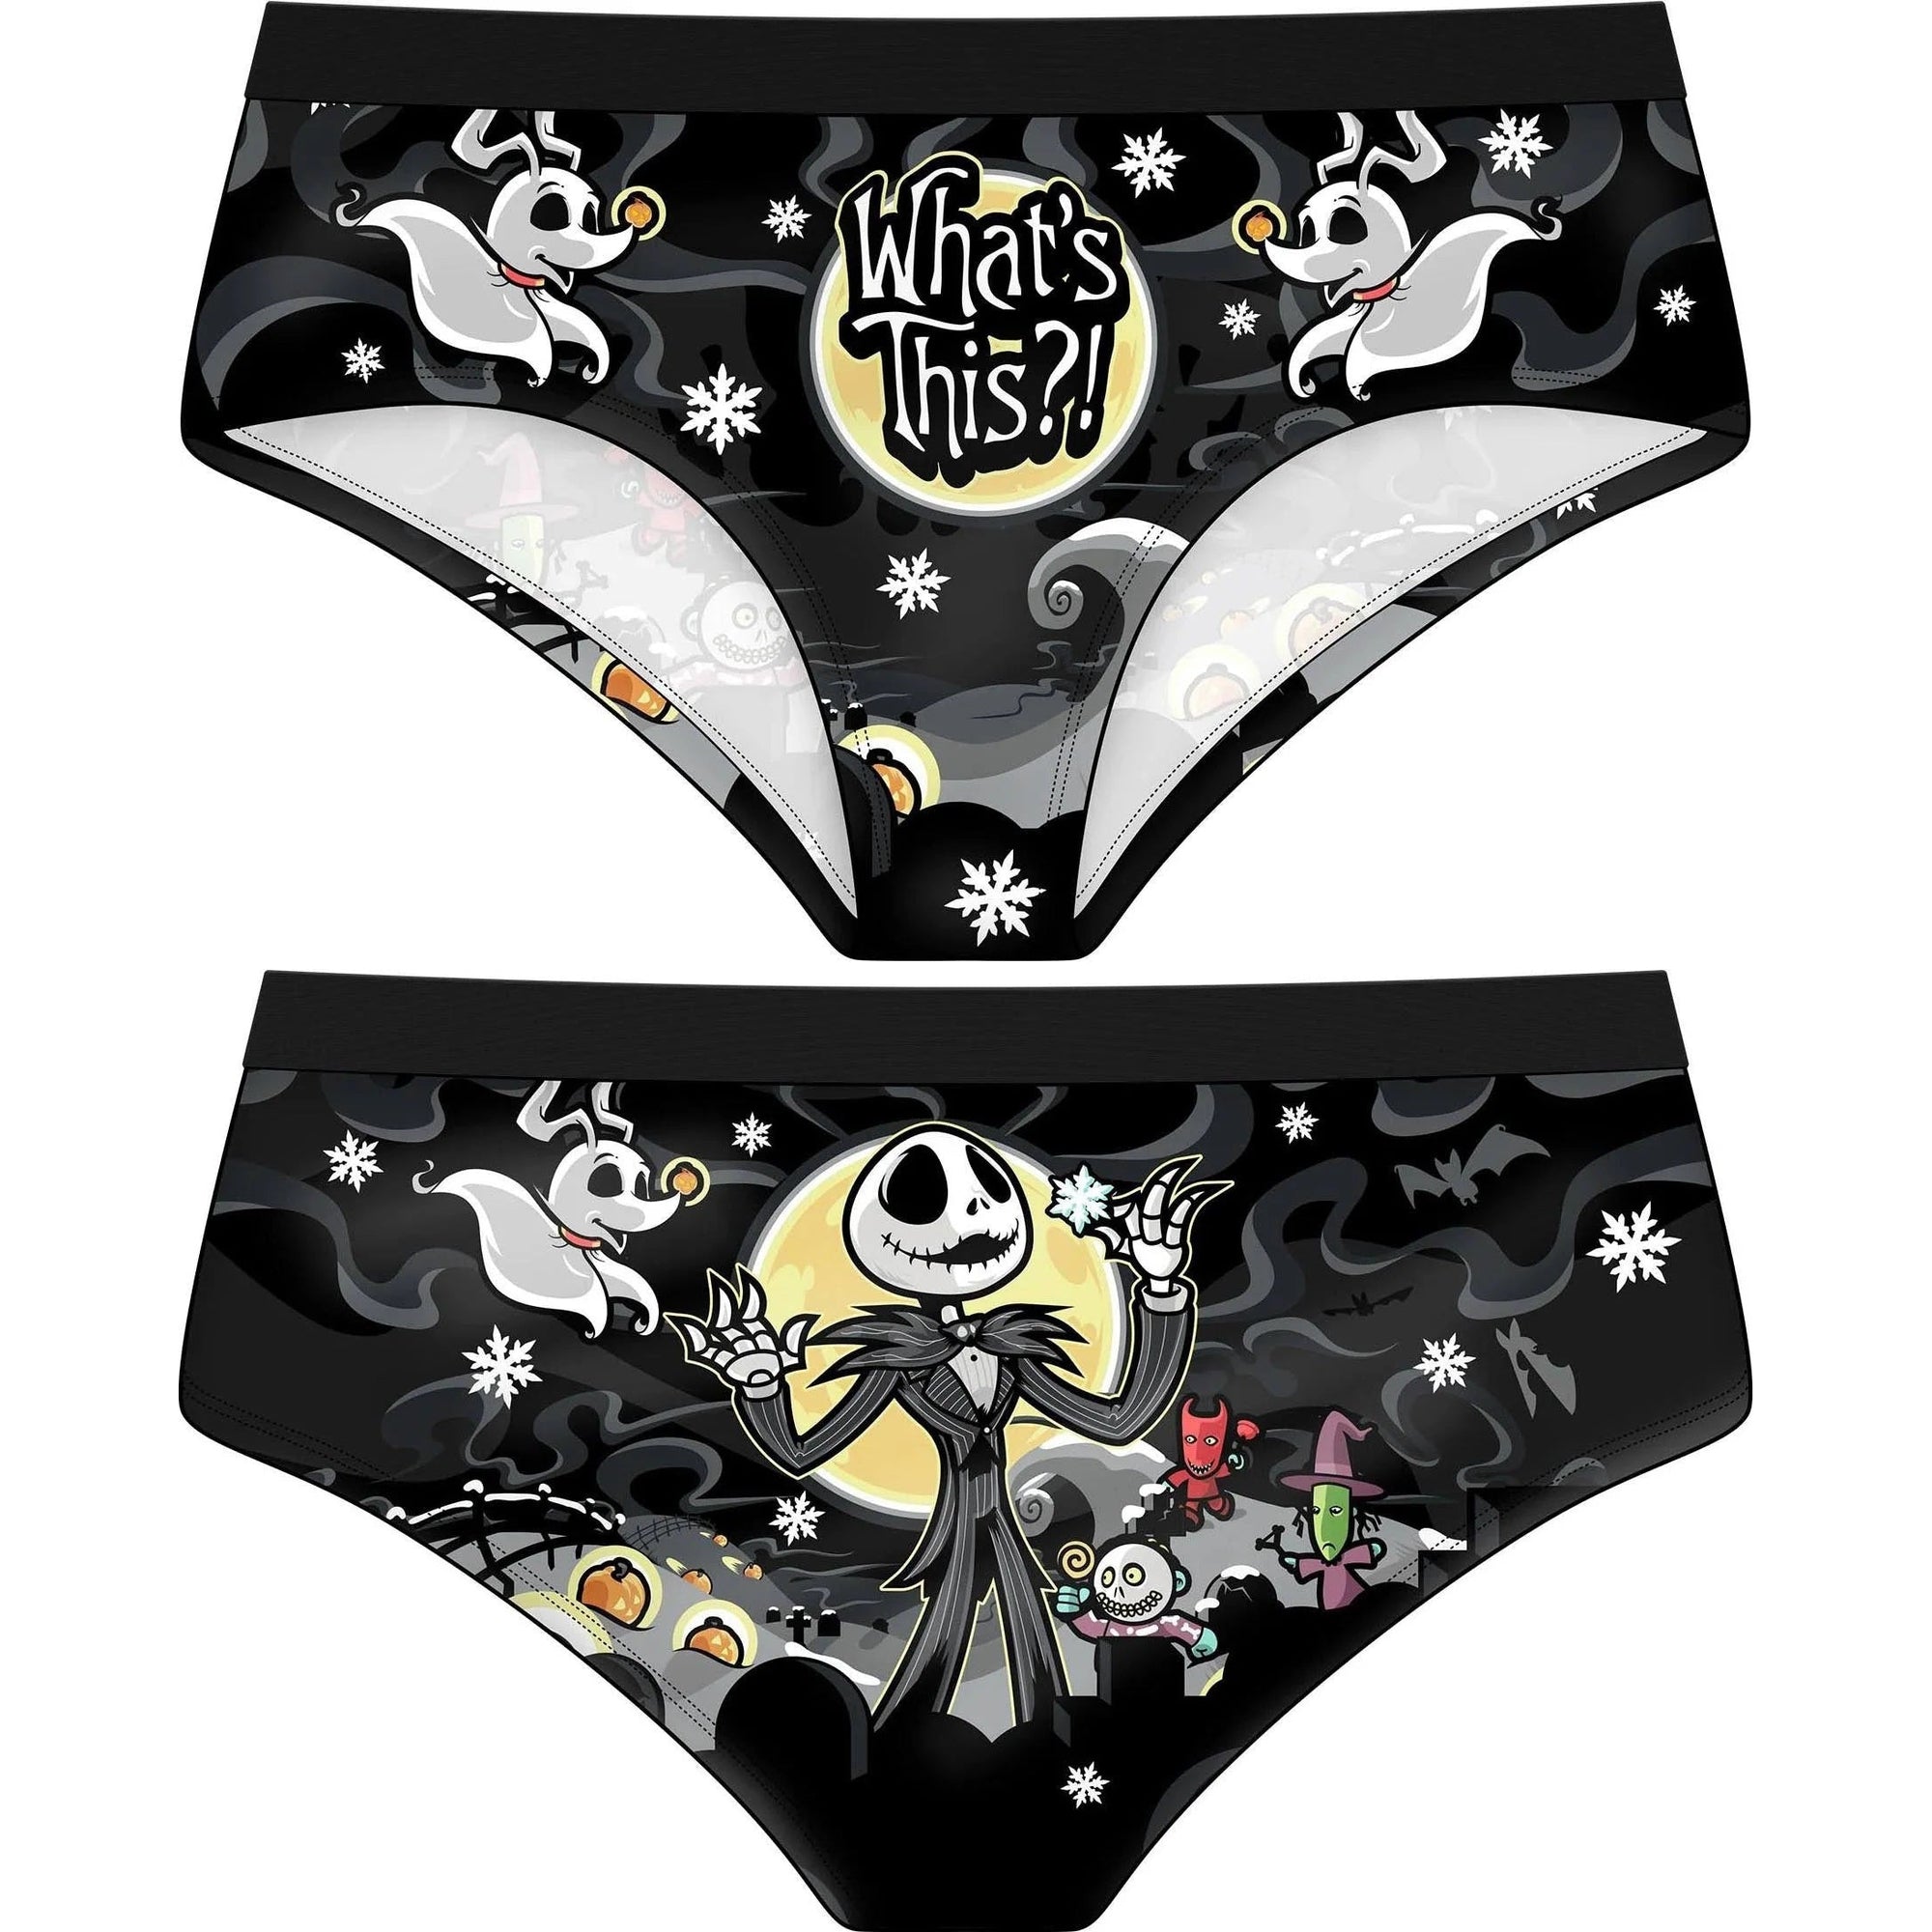 Golden Girls' Underwear Brings A Whole New Meaning To Granny Panties